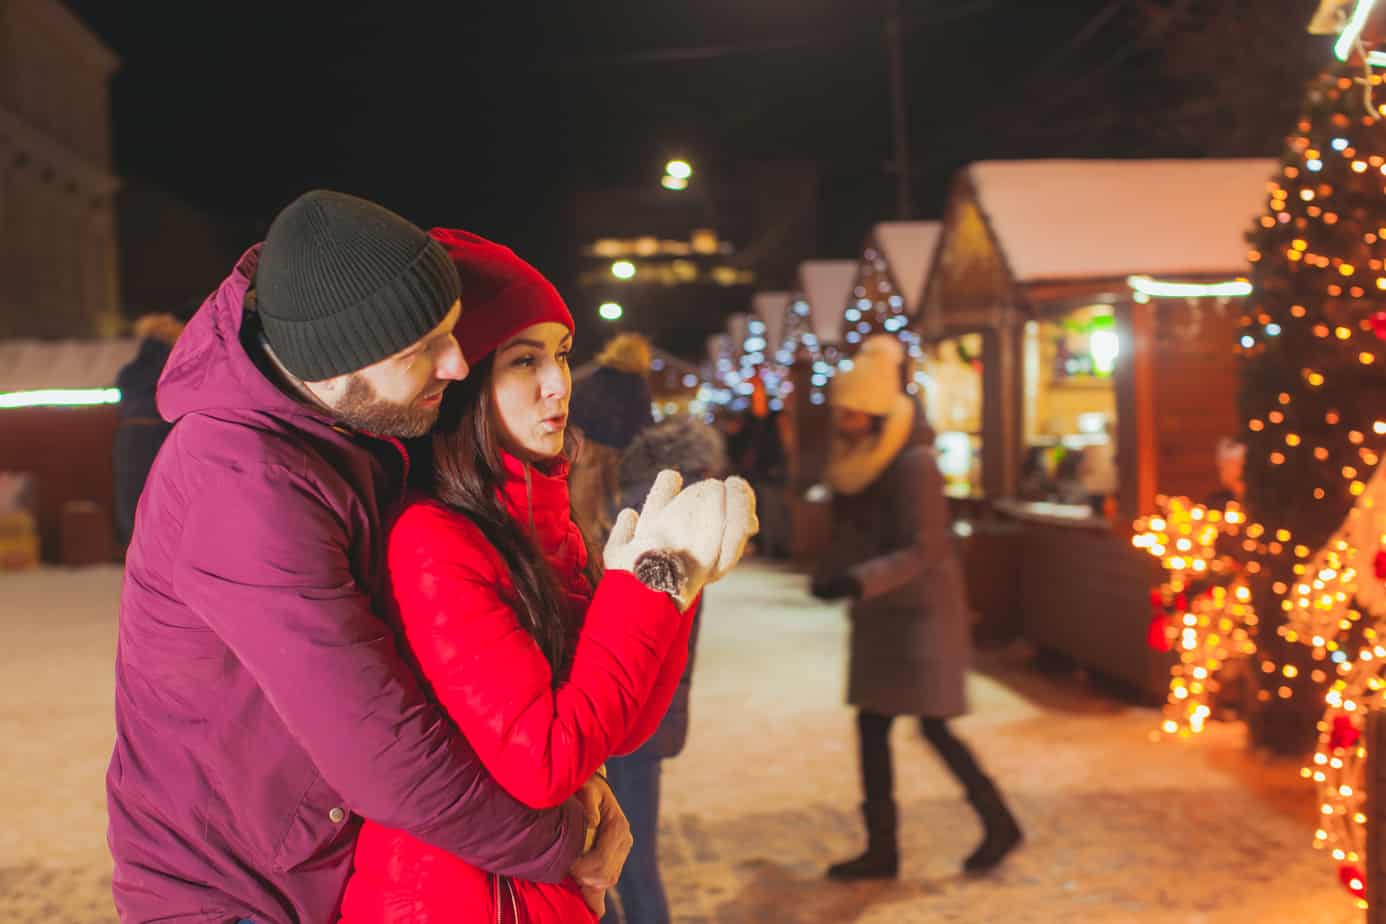 32 Magical, Romantic Christmas Date Ideas for Couples